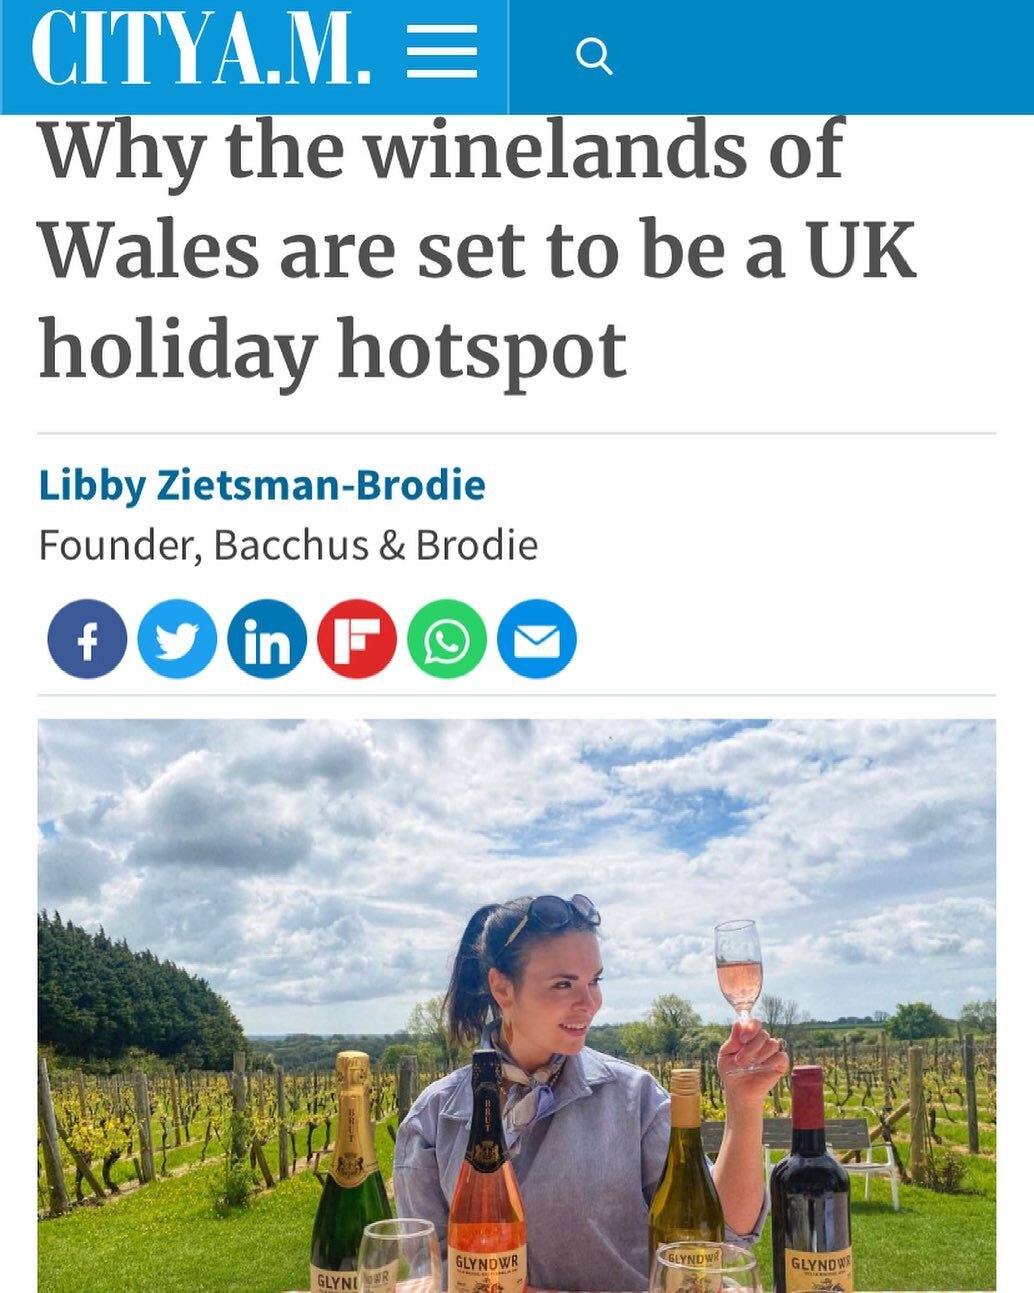 🍾 To kick off #WelshWineWeek here is my first wine-travel piece for @cityamtravel about this new surprise #winetourism destination. (#LinkInBio).

🥂 Holidaying abroad this year is tricky and a staycation may be on the cards, but before you book a l